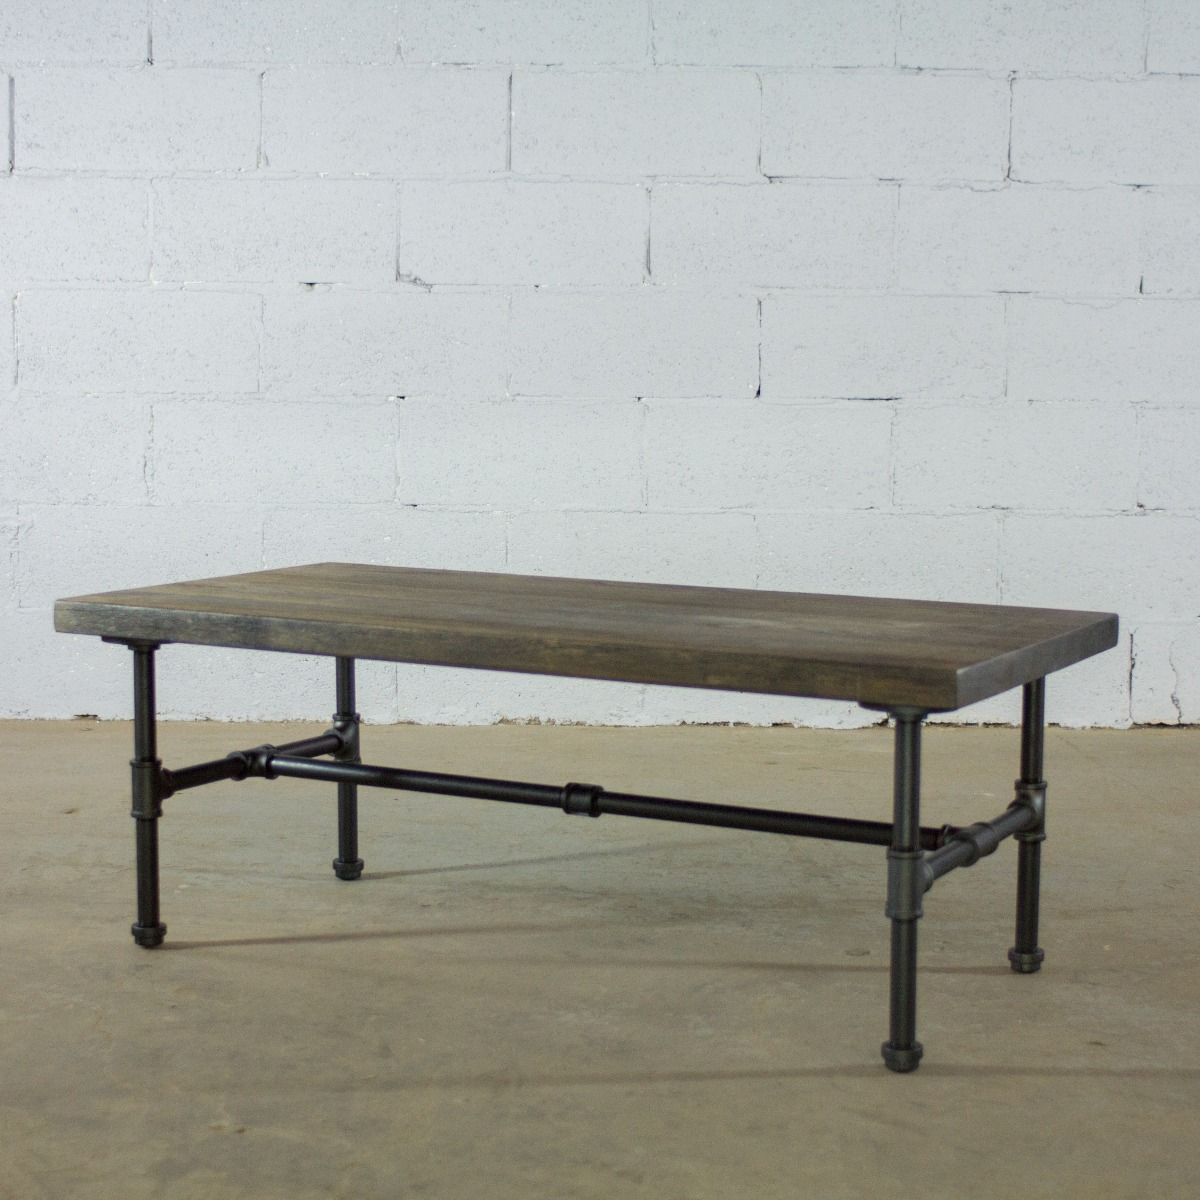 Modern Industrial Rectangular Coffee Table - Nordic Side - 10-12, feed-cl0-over-80-dollars, furniture-pipeline, furniture-tag, US